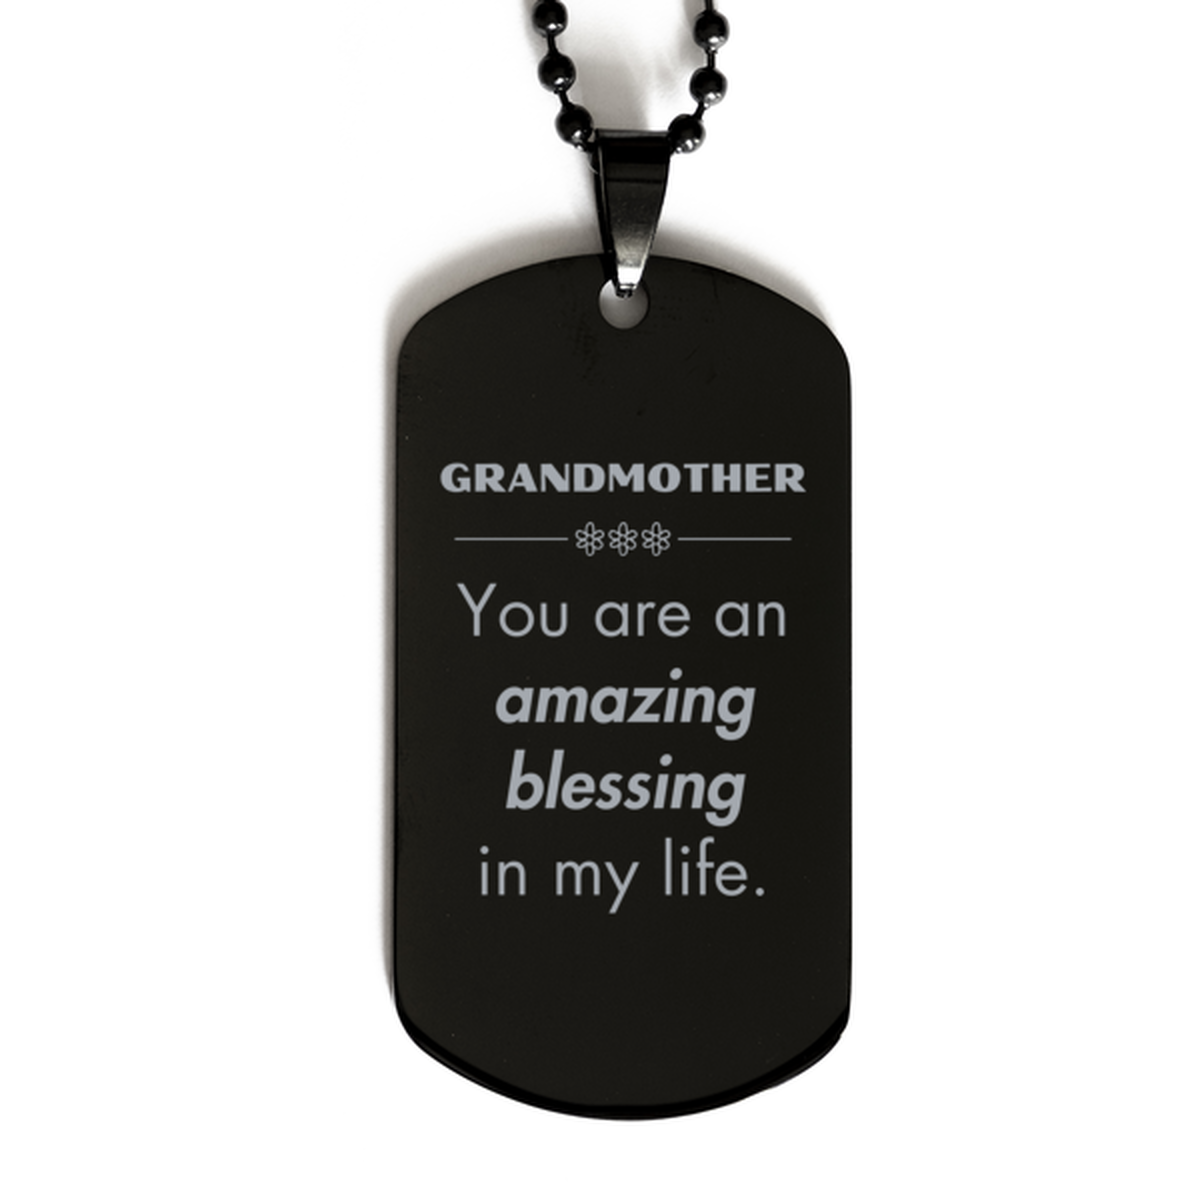 Grandmother Black Dog Tag, You are an amazing blessing in my life, Thank You Gifts For Grandmother, Inspirational Birthday Christmas Unique Gifts For Grandmother